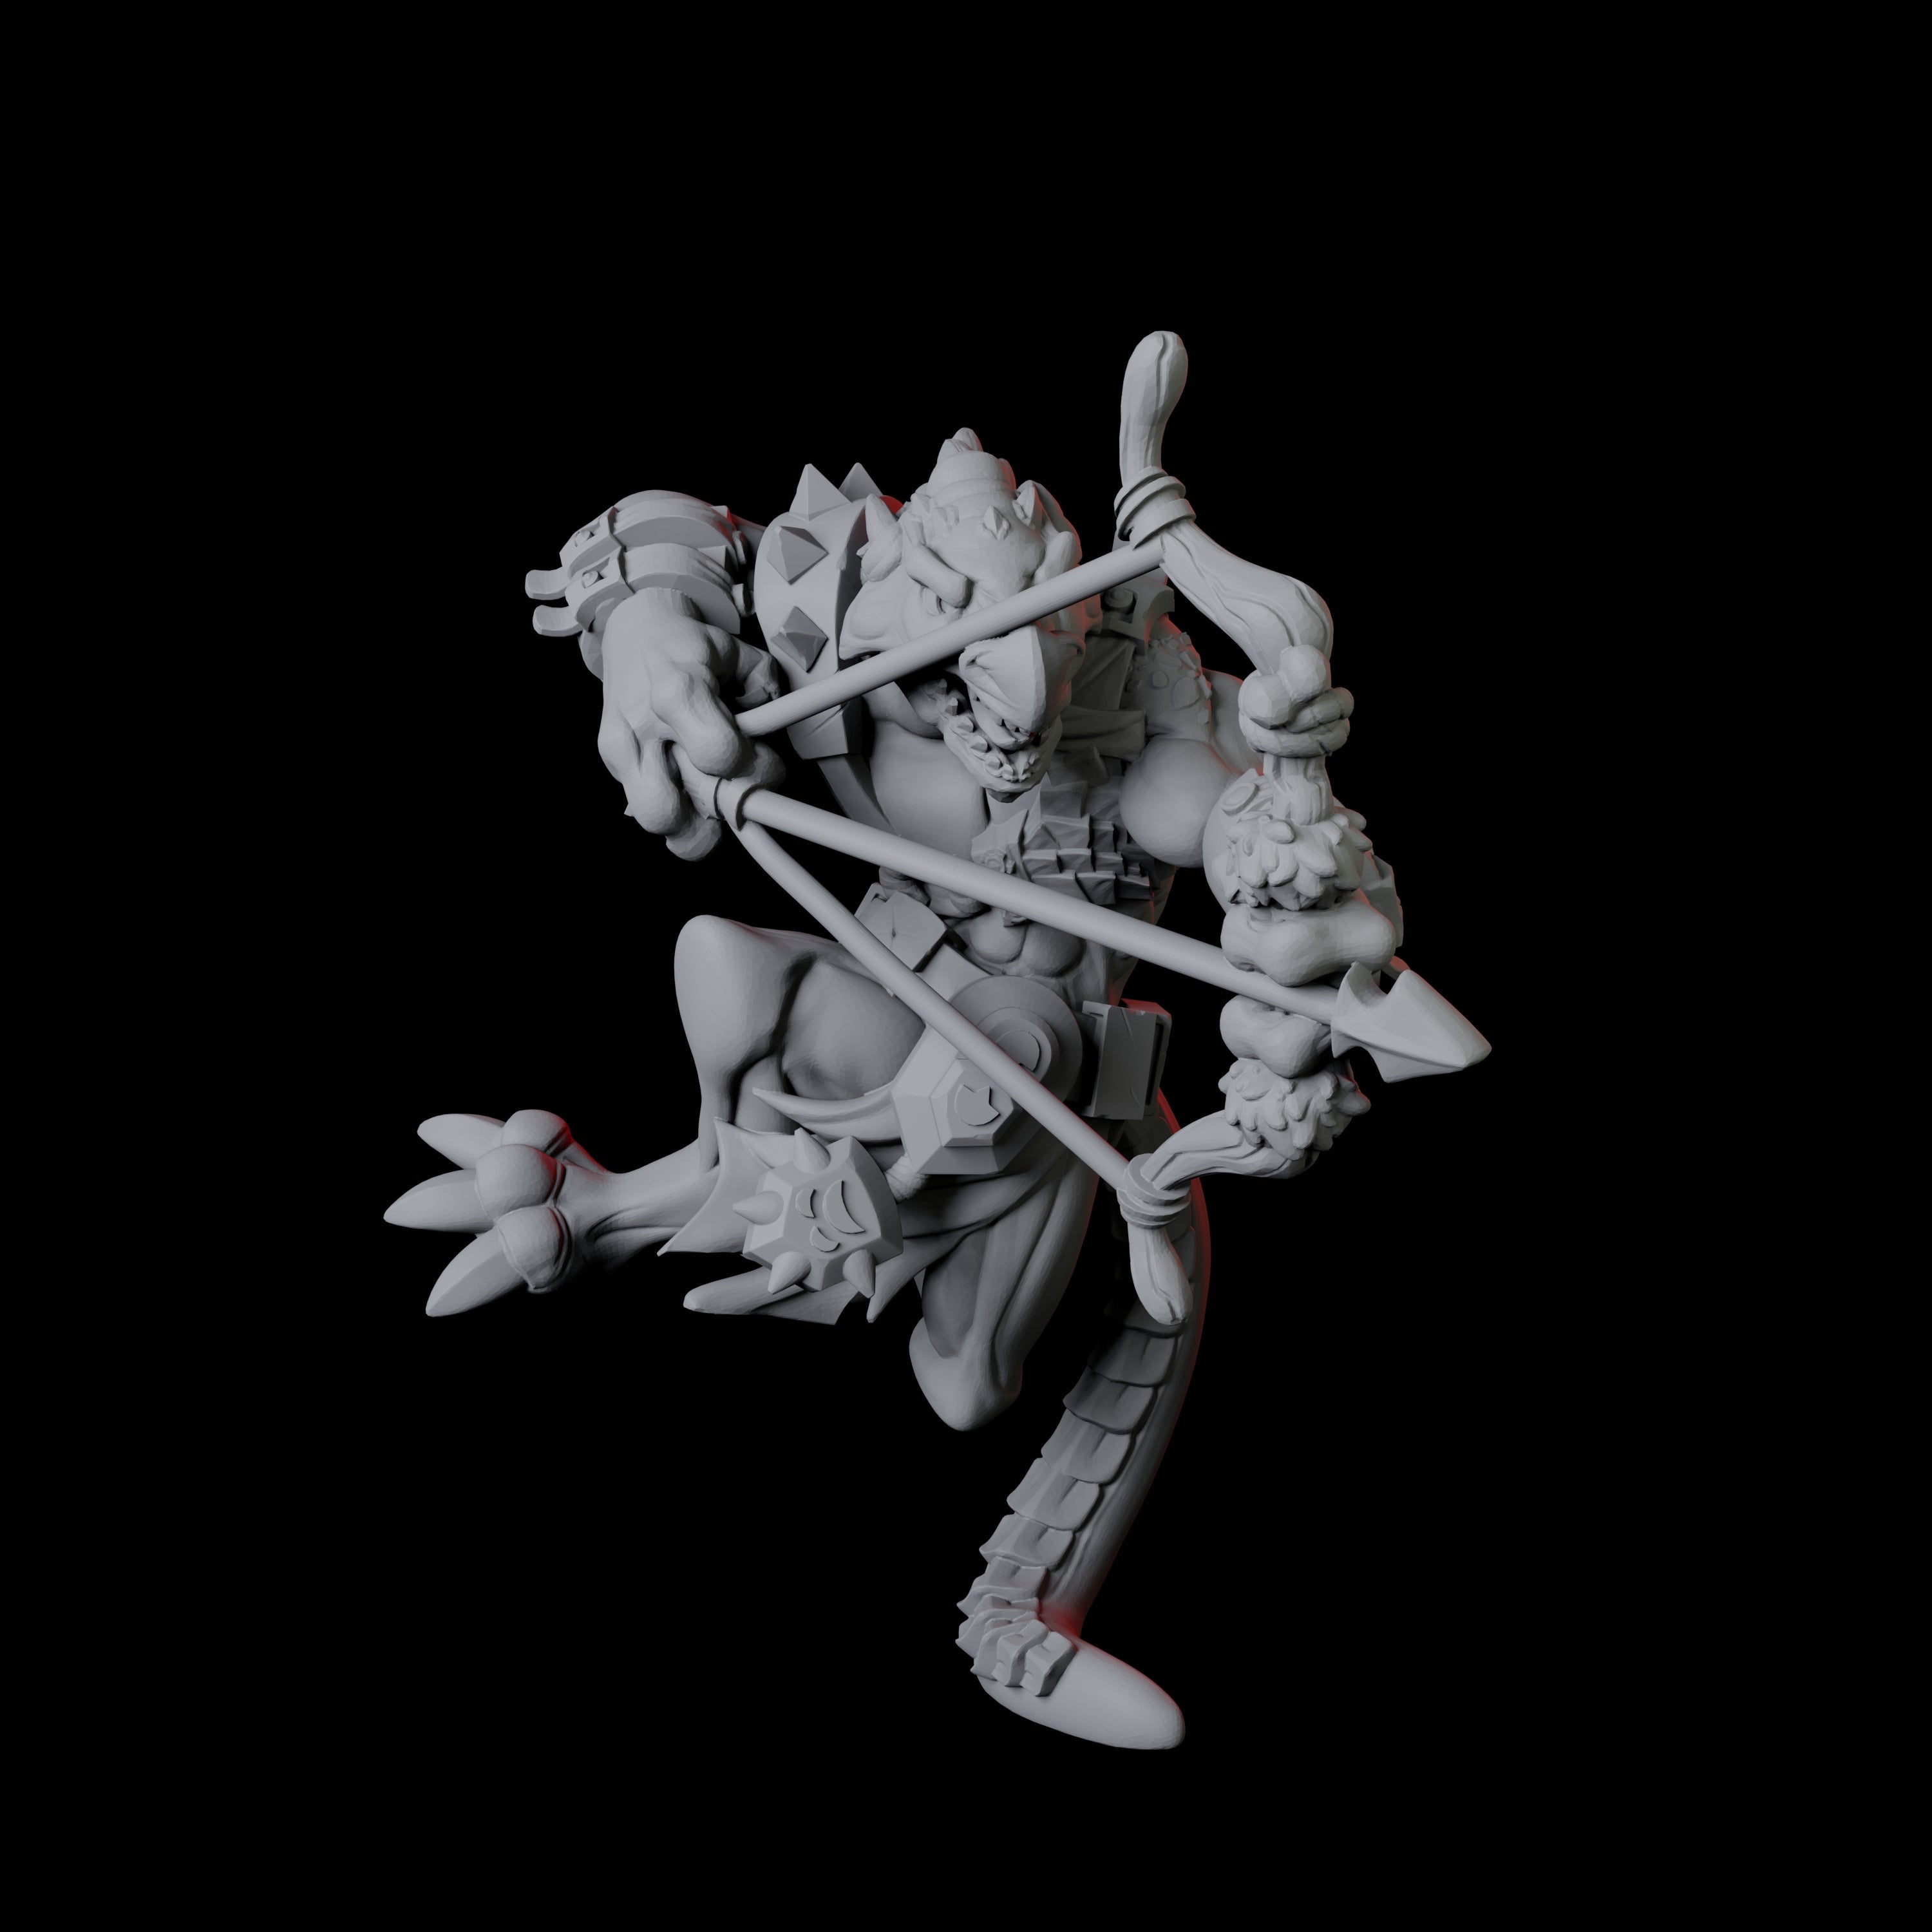 Kobold Ranger C Miniature for Dungeons and Dragons, Pathfinder or other TTRPGs